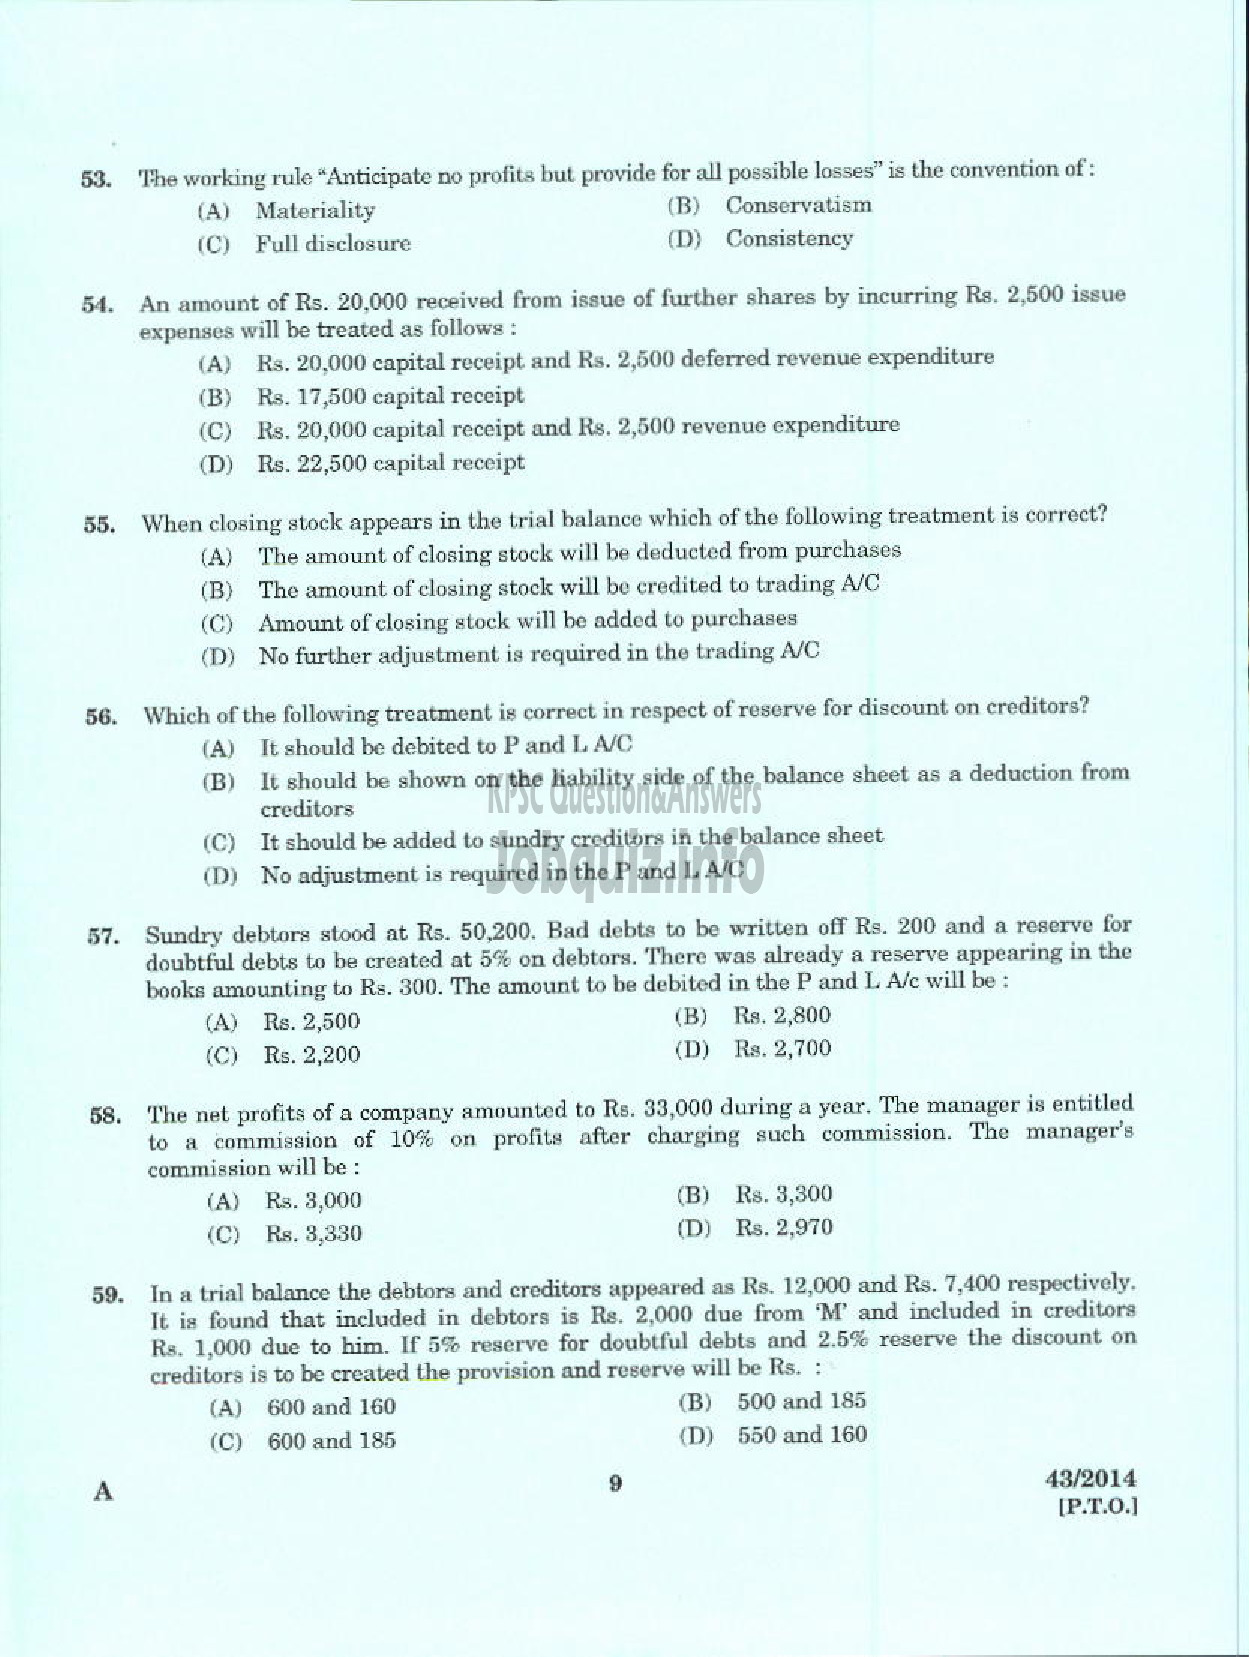 Kerala PSC Question Paper - DEPUTY GENERAL MANAGER DCB IDKY AND KSGD PART I AND PART II-7